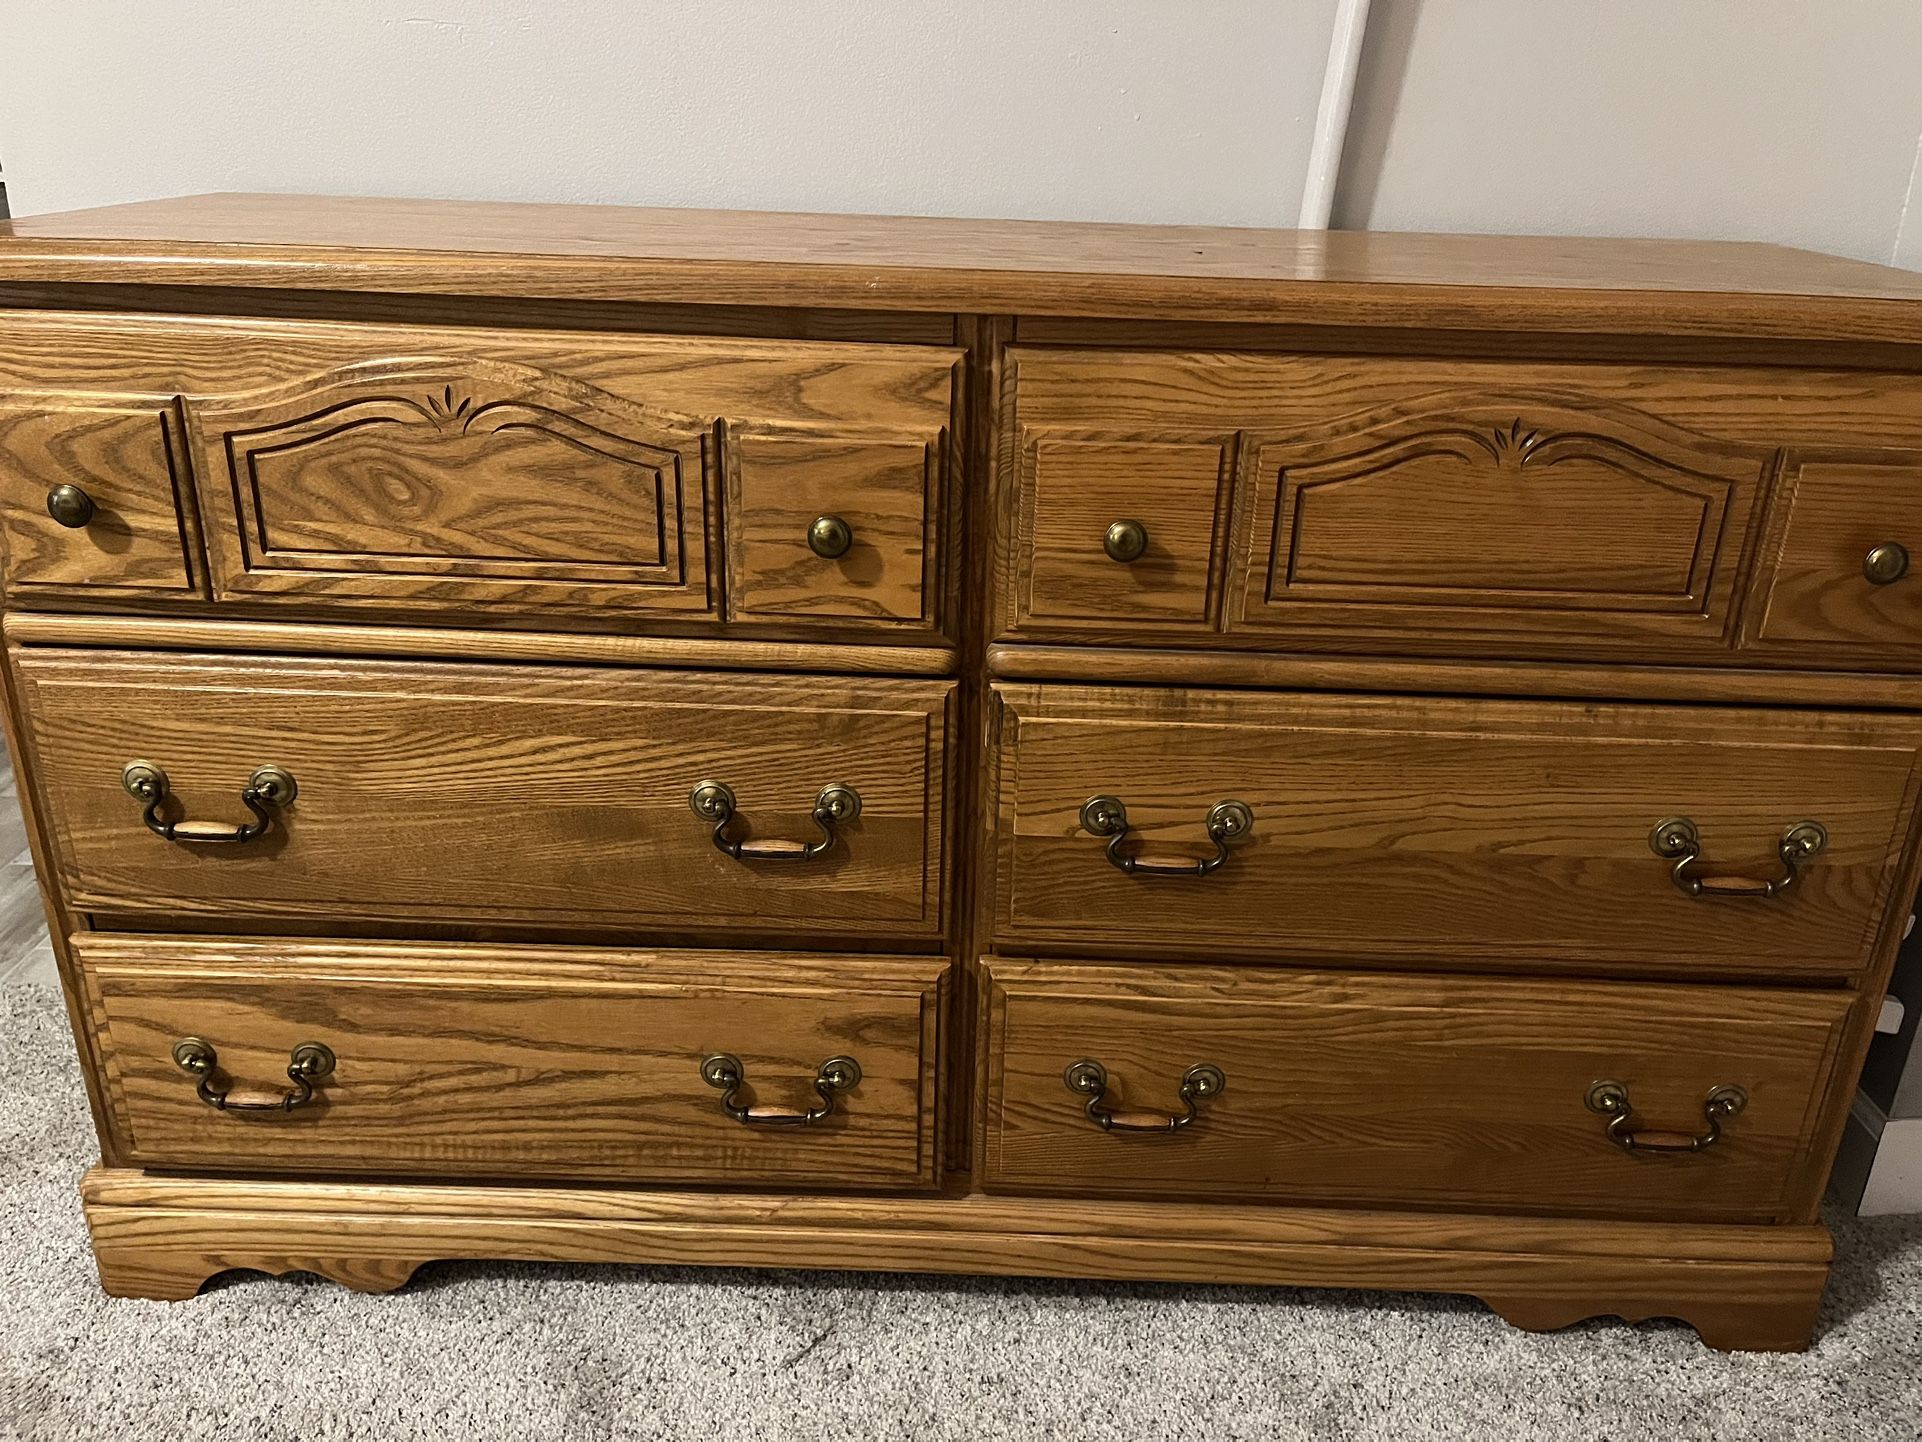 Dresser - Real Wood  Child Proof Drawers $50